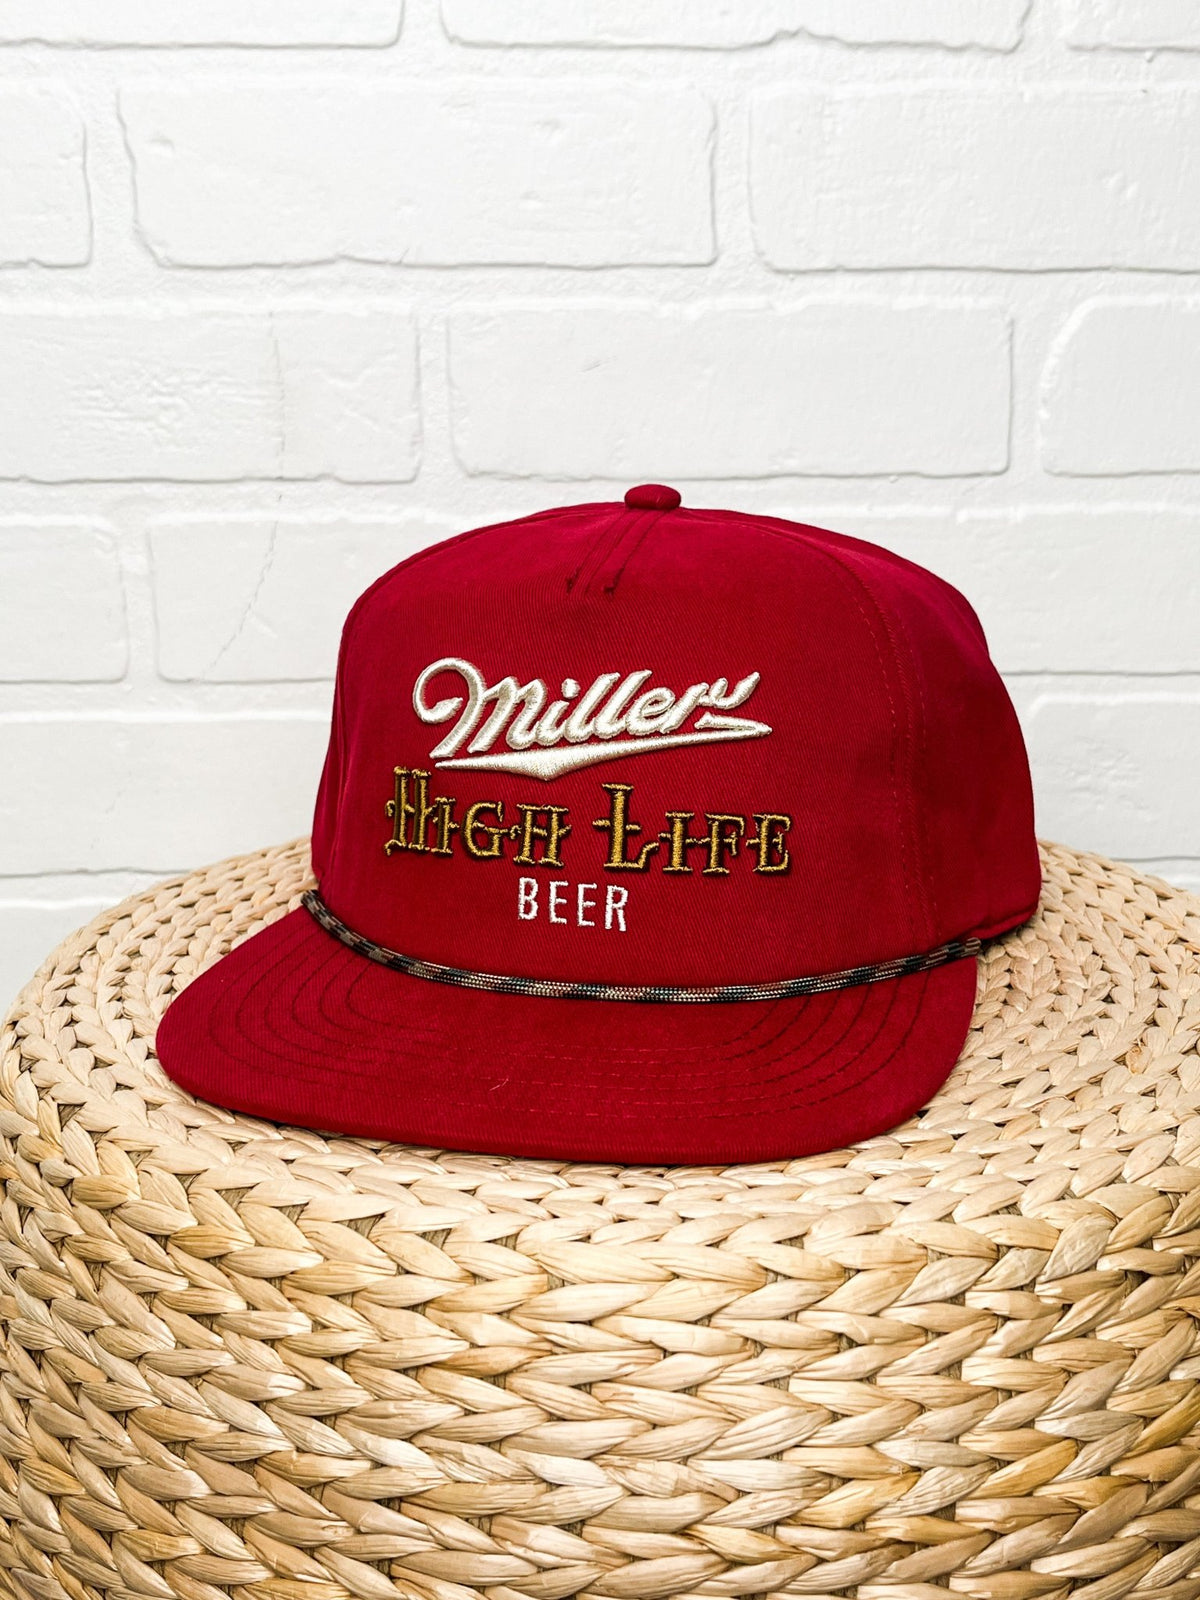 Miller high life coachella hat wine - Trendy Gifts at Lush Fashion Lounge Boutique in Oklahoma City